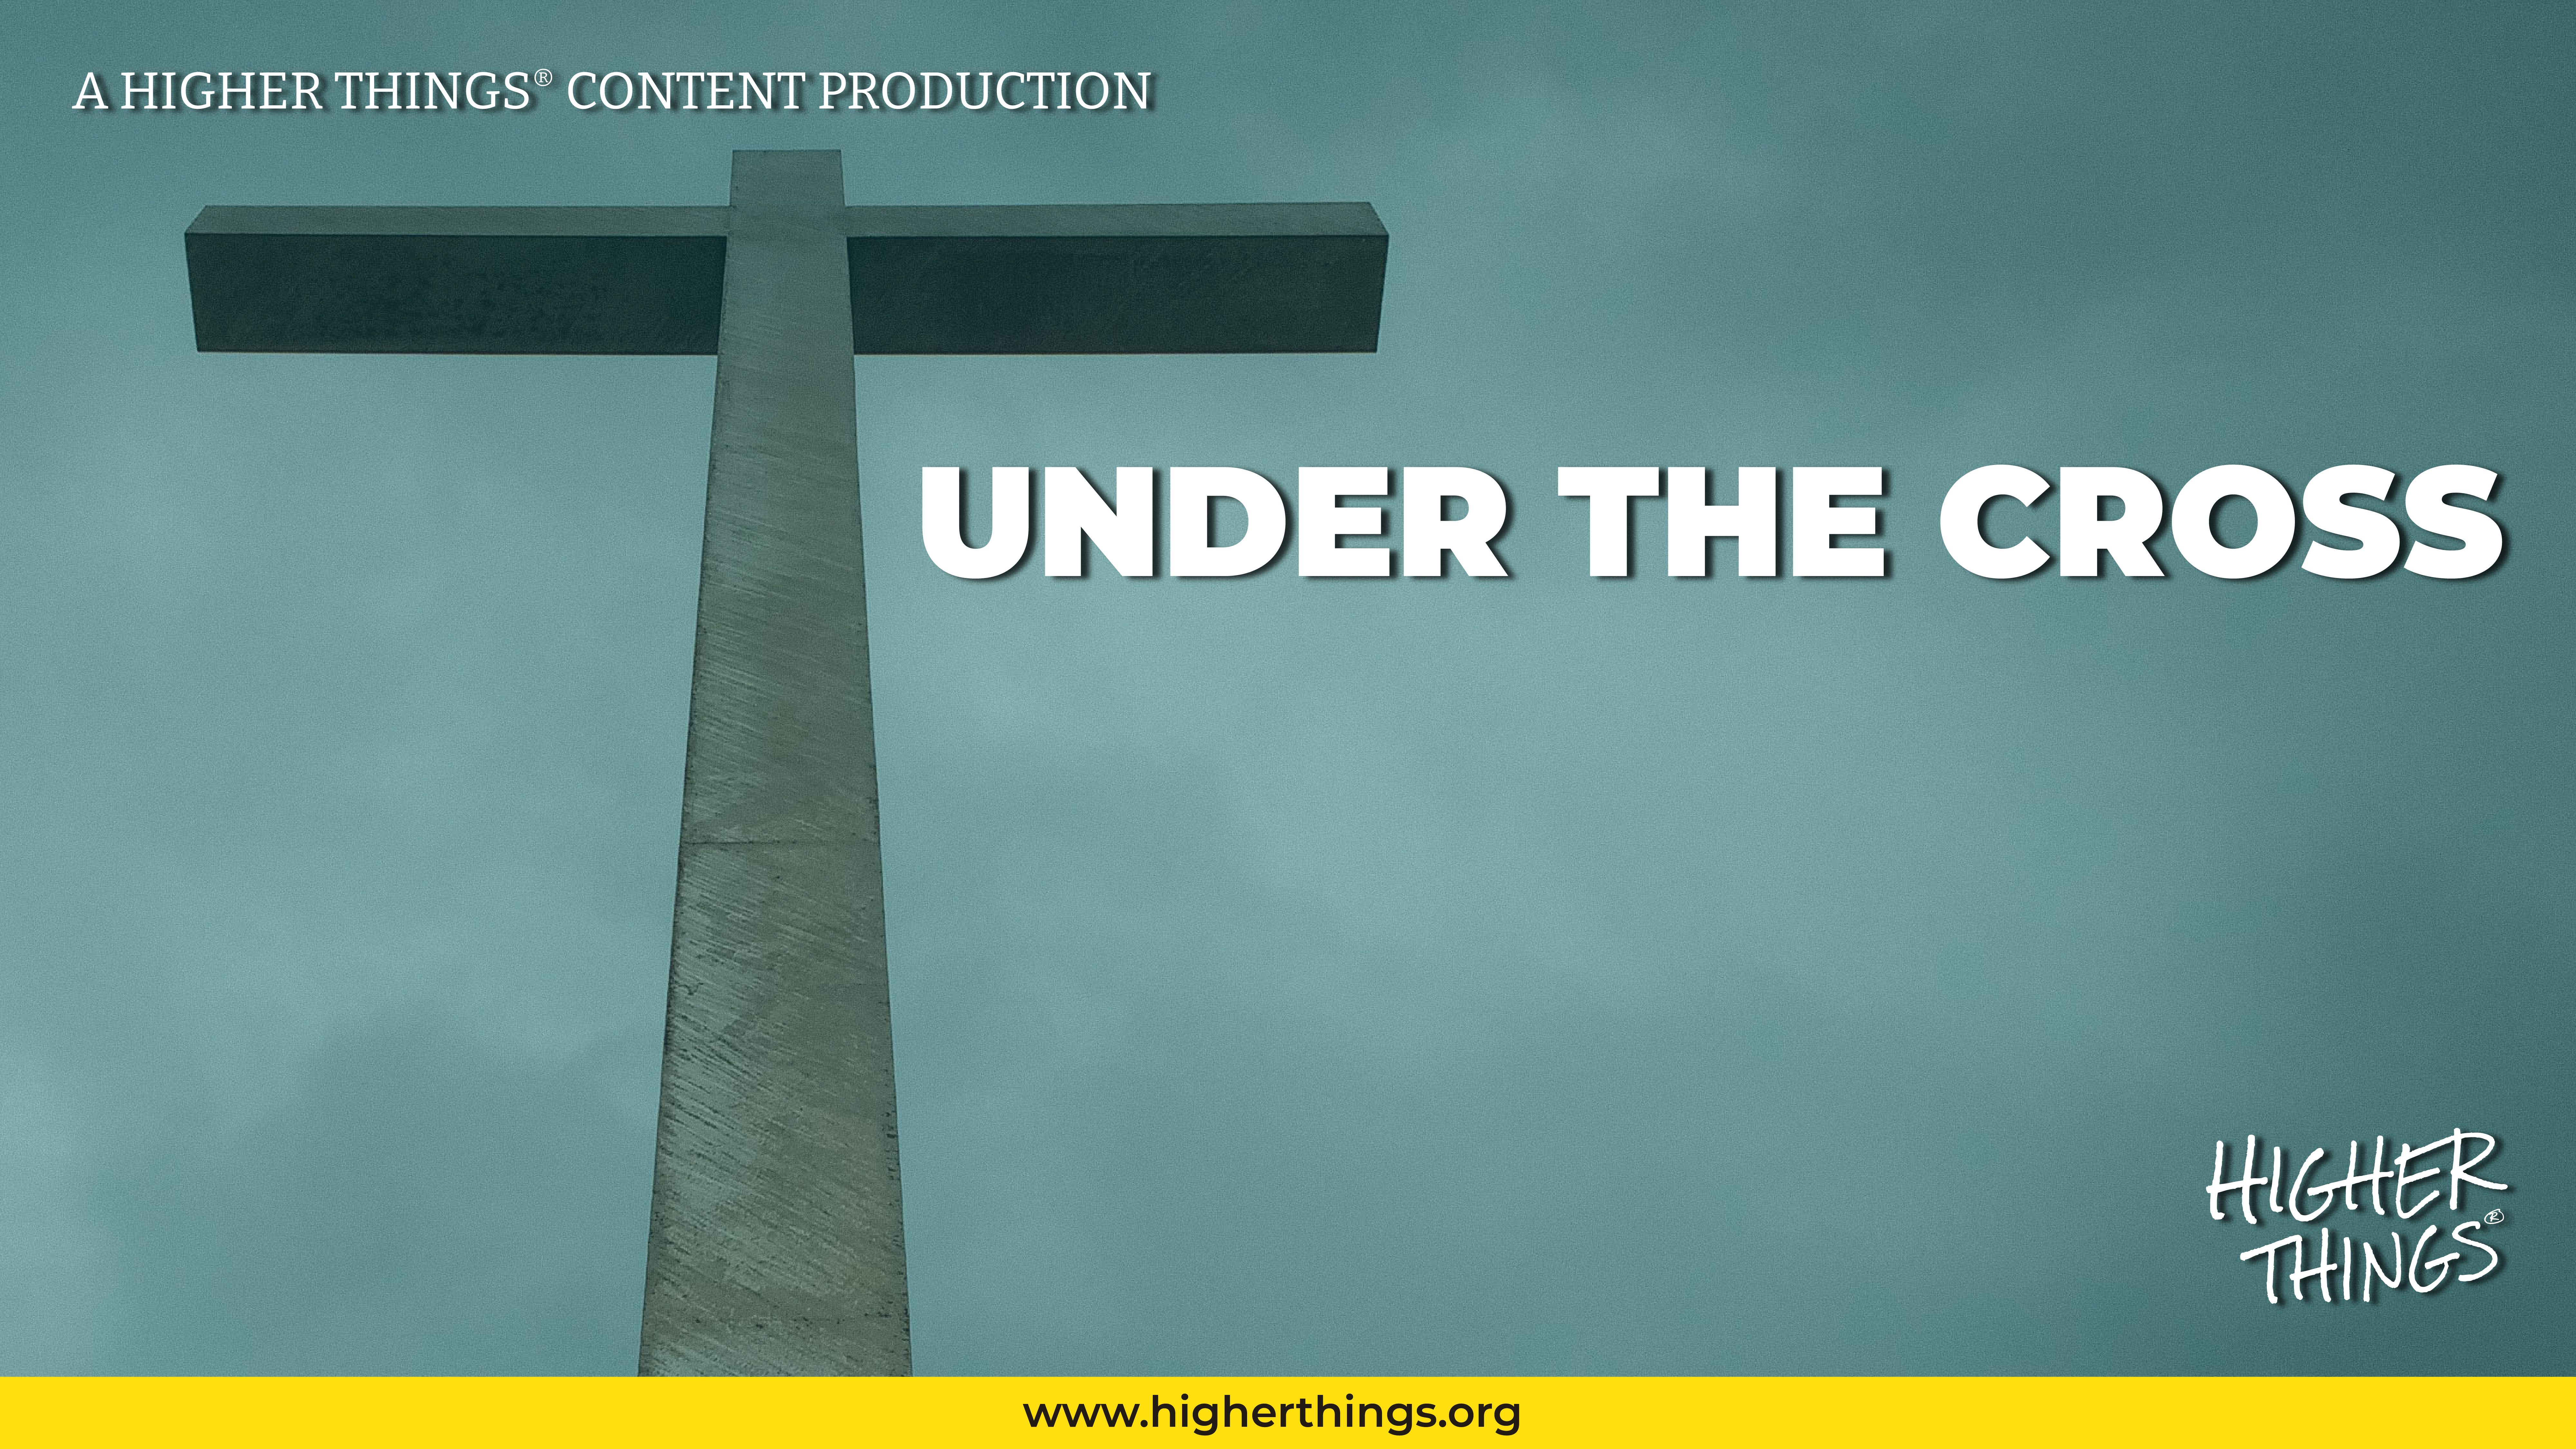 UNDER THE CROSS: WHAT DOES THIS MEAN?